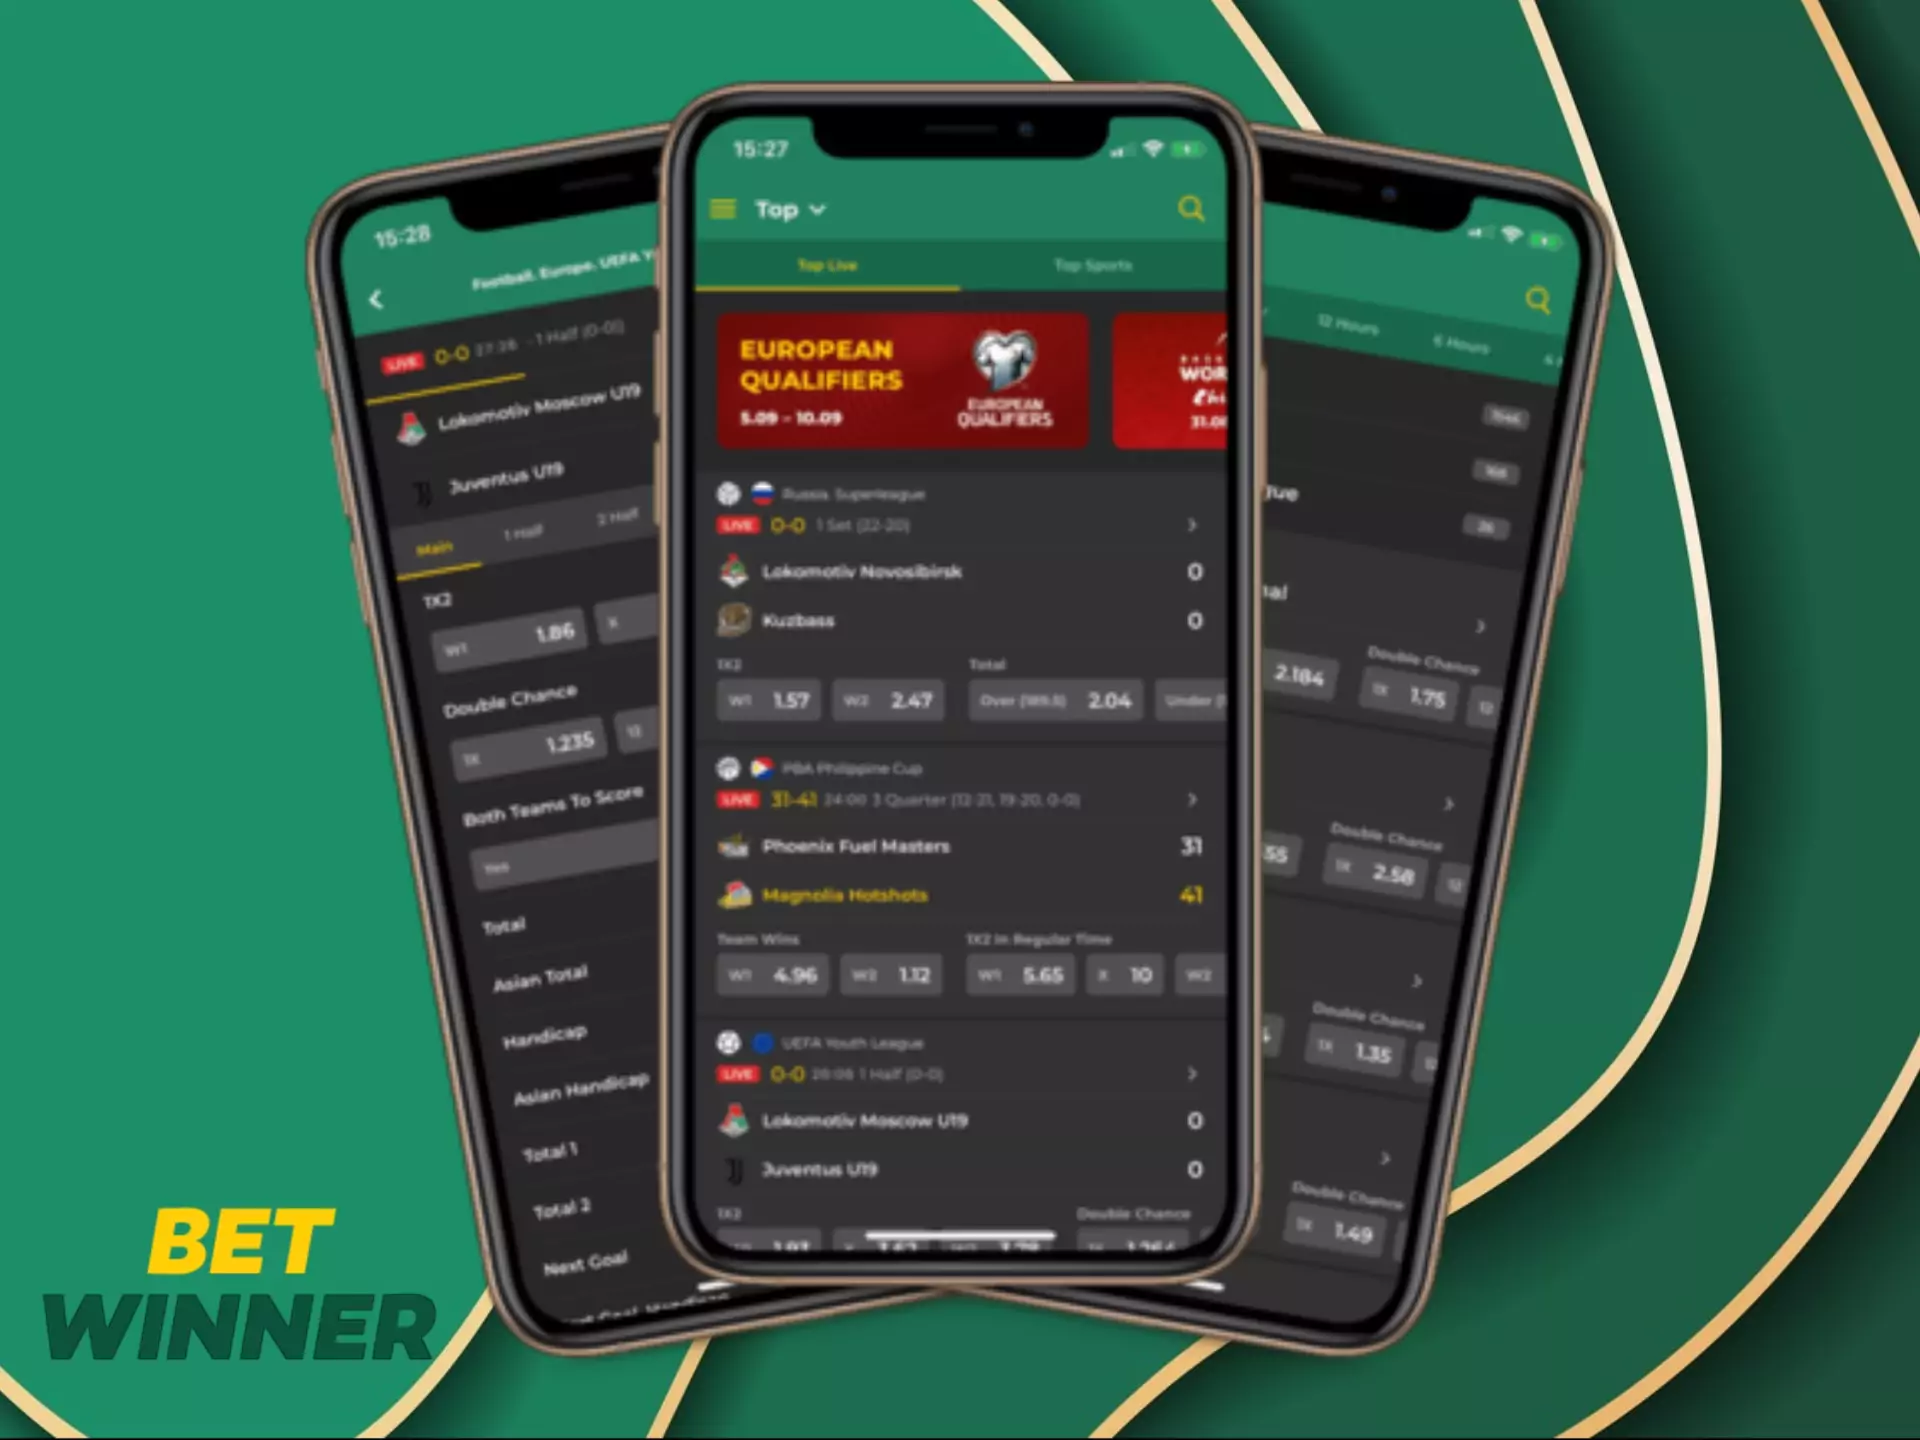 Install the Betwinner app on your Android phone to place bets easily.